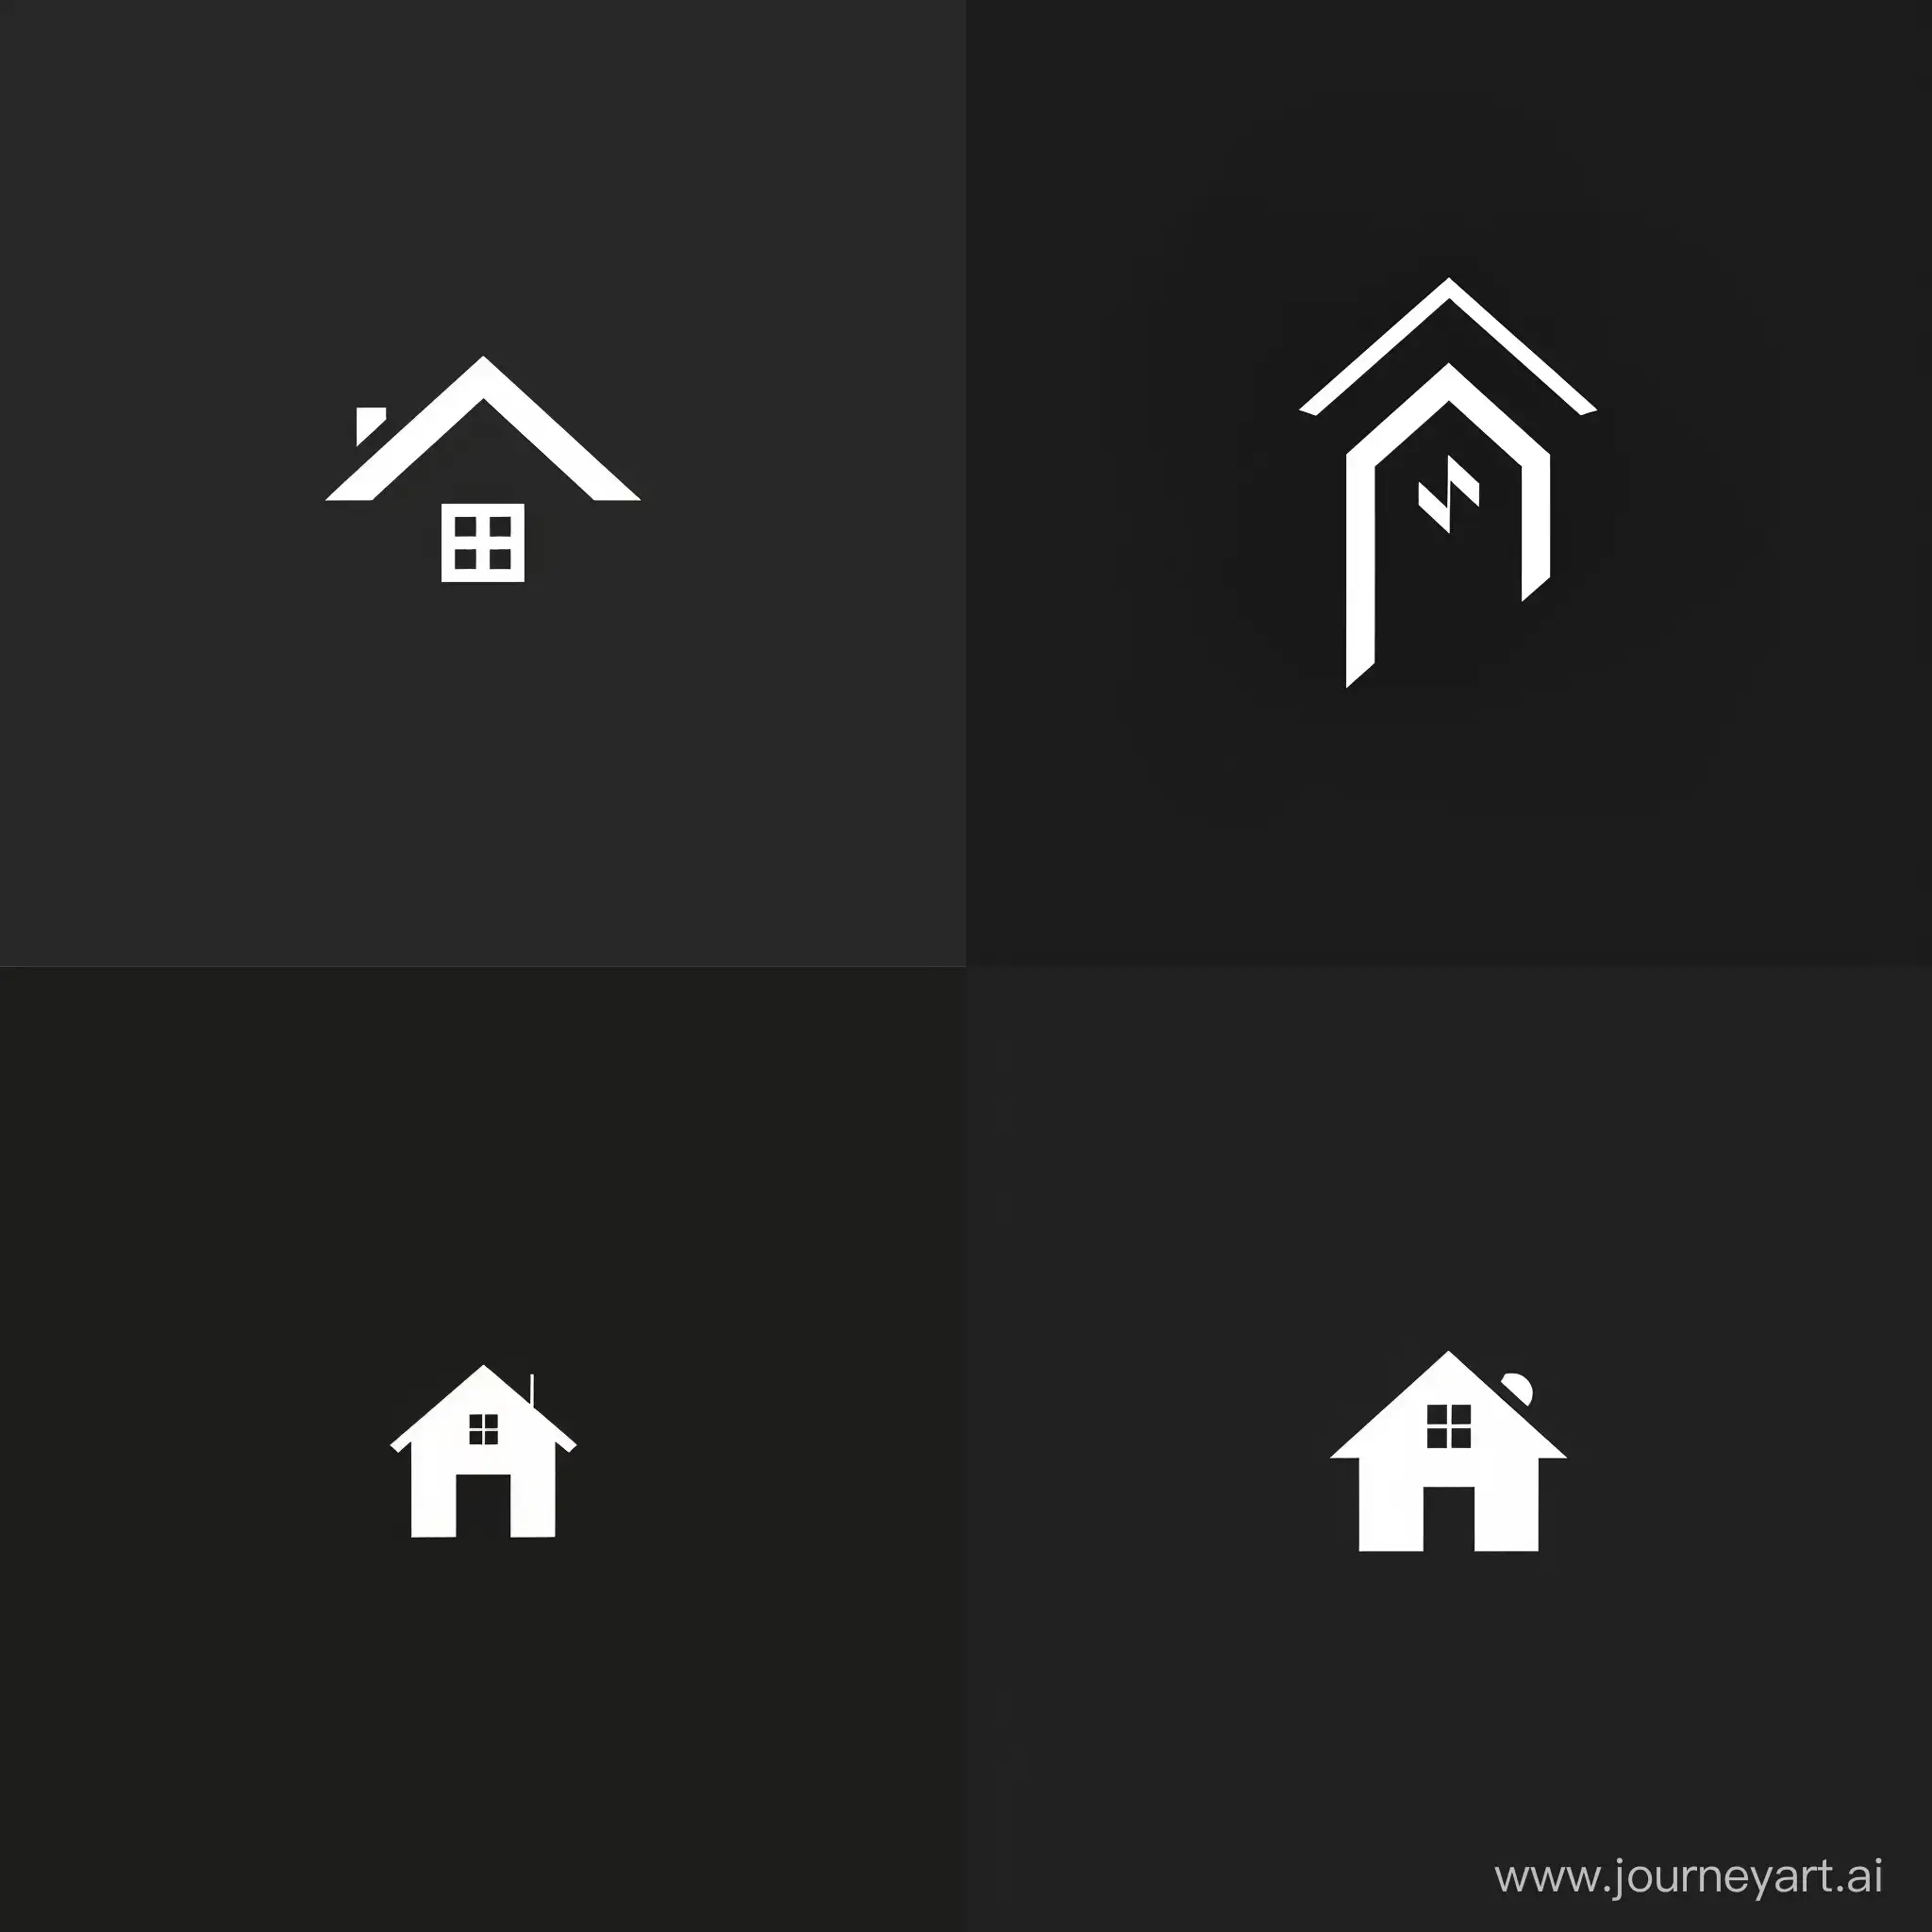 Design of minimalistic logo featuring a [house:sprout:0,5] in white on a black background